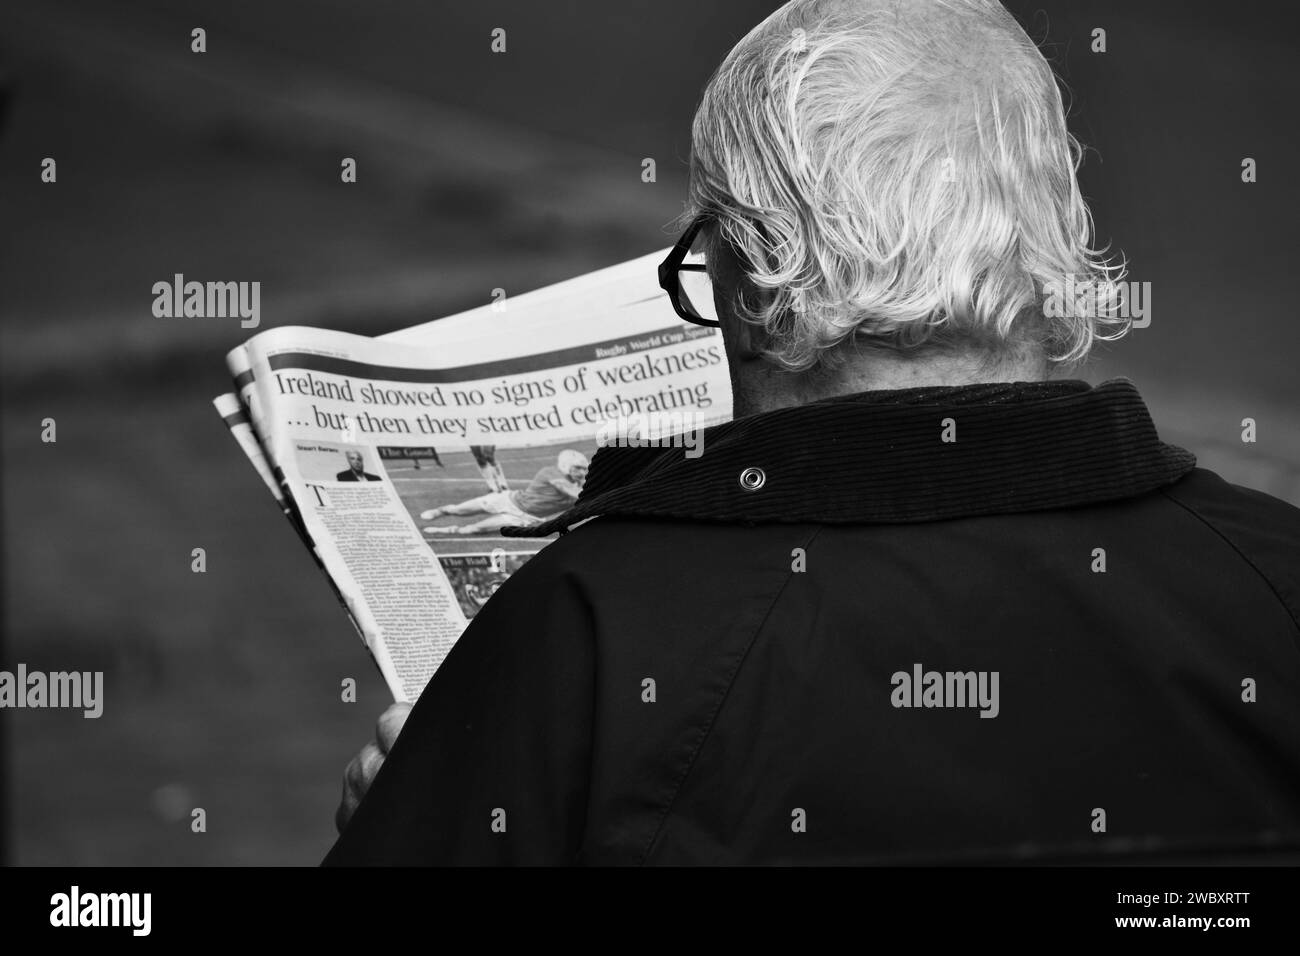 Ross On Wye, Herefordshire, England Sept 24 2023: Man with grey hair and glasses sat down reading a newspaper on a public bench. Black and white photo Stock Photo